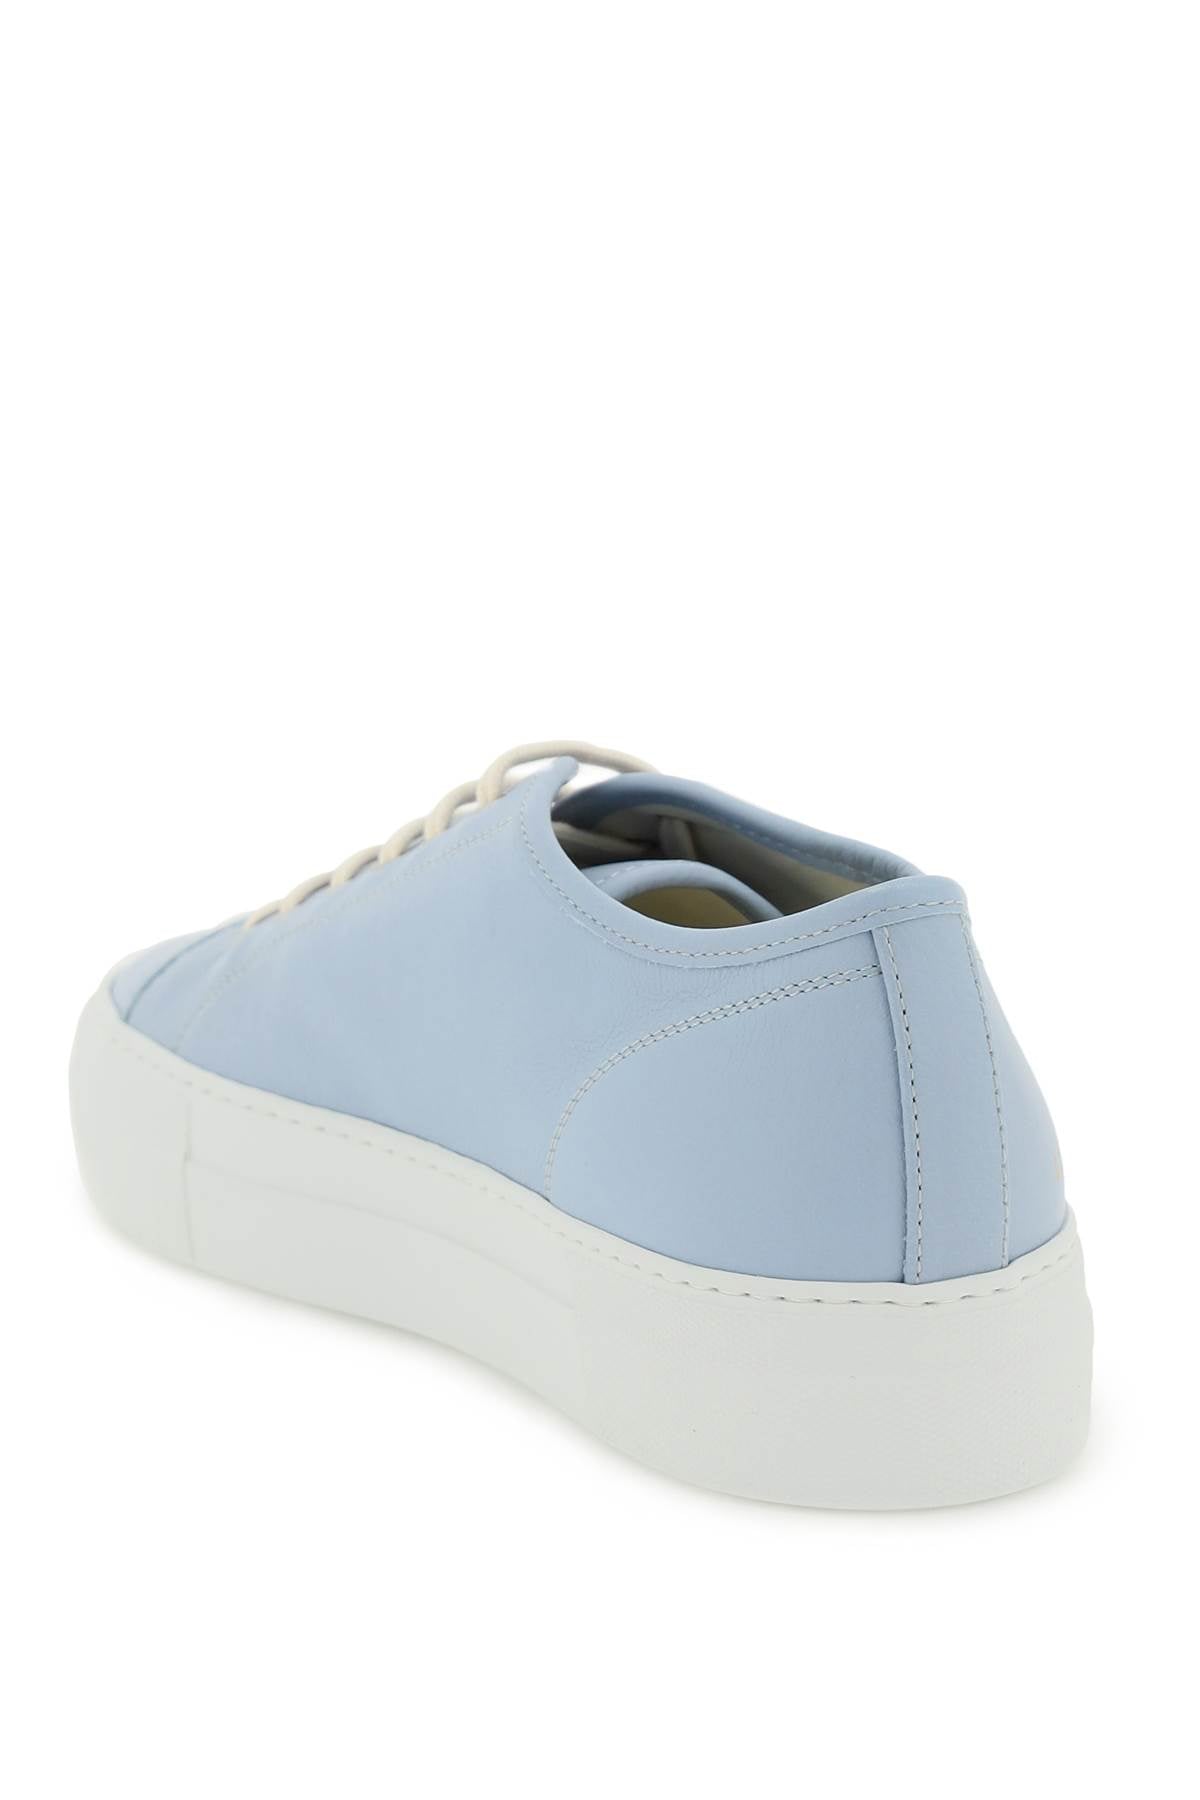 Common Projects Common projects leather tournament low super sneakers